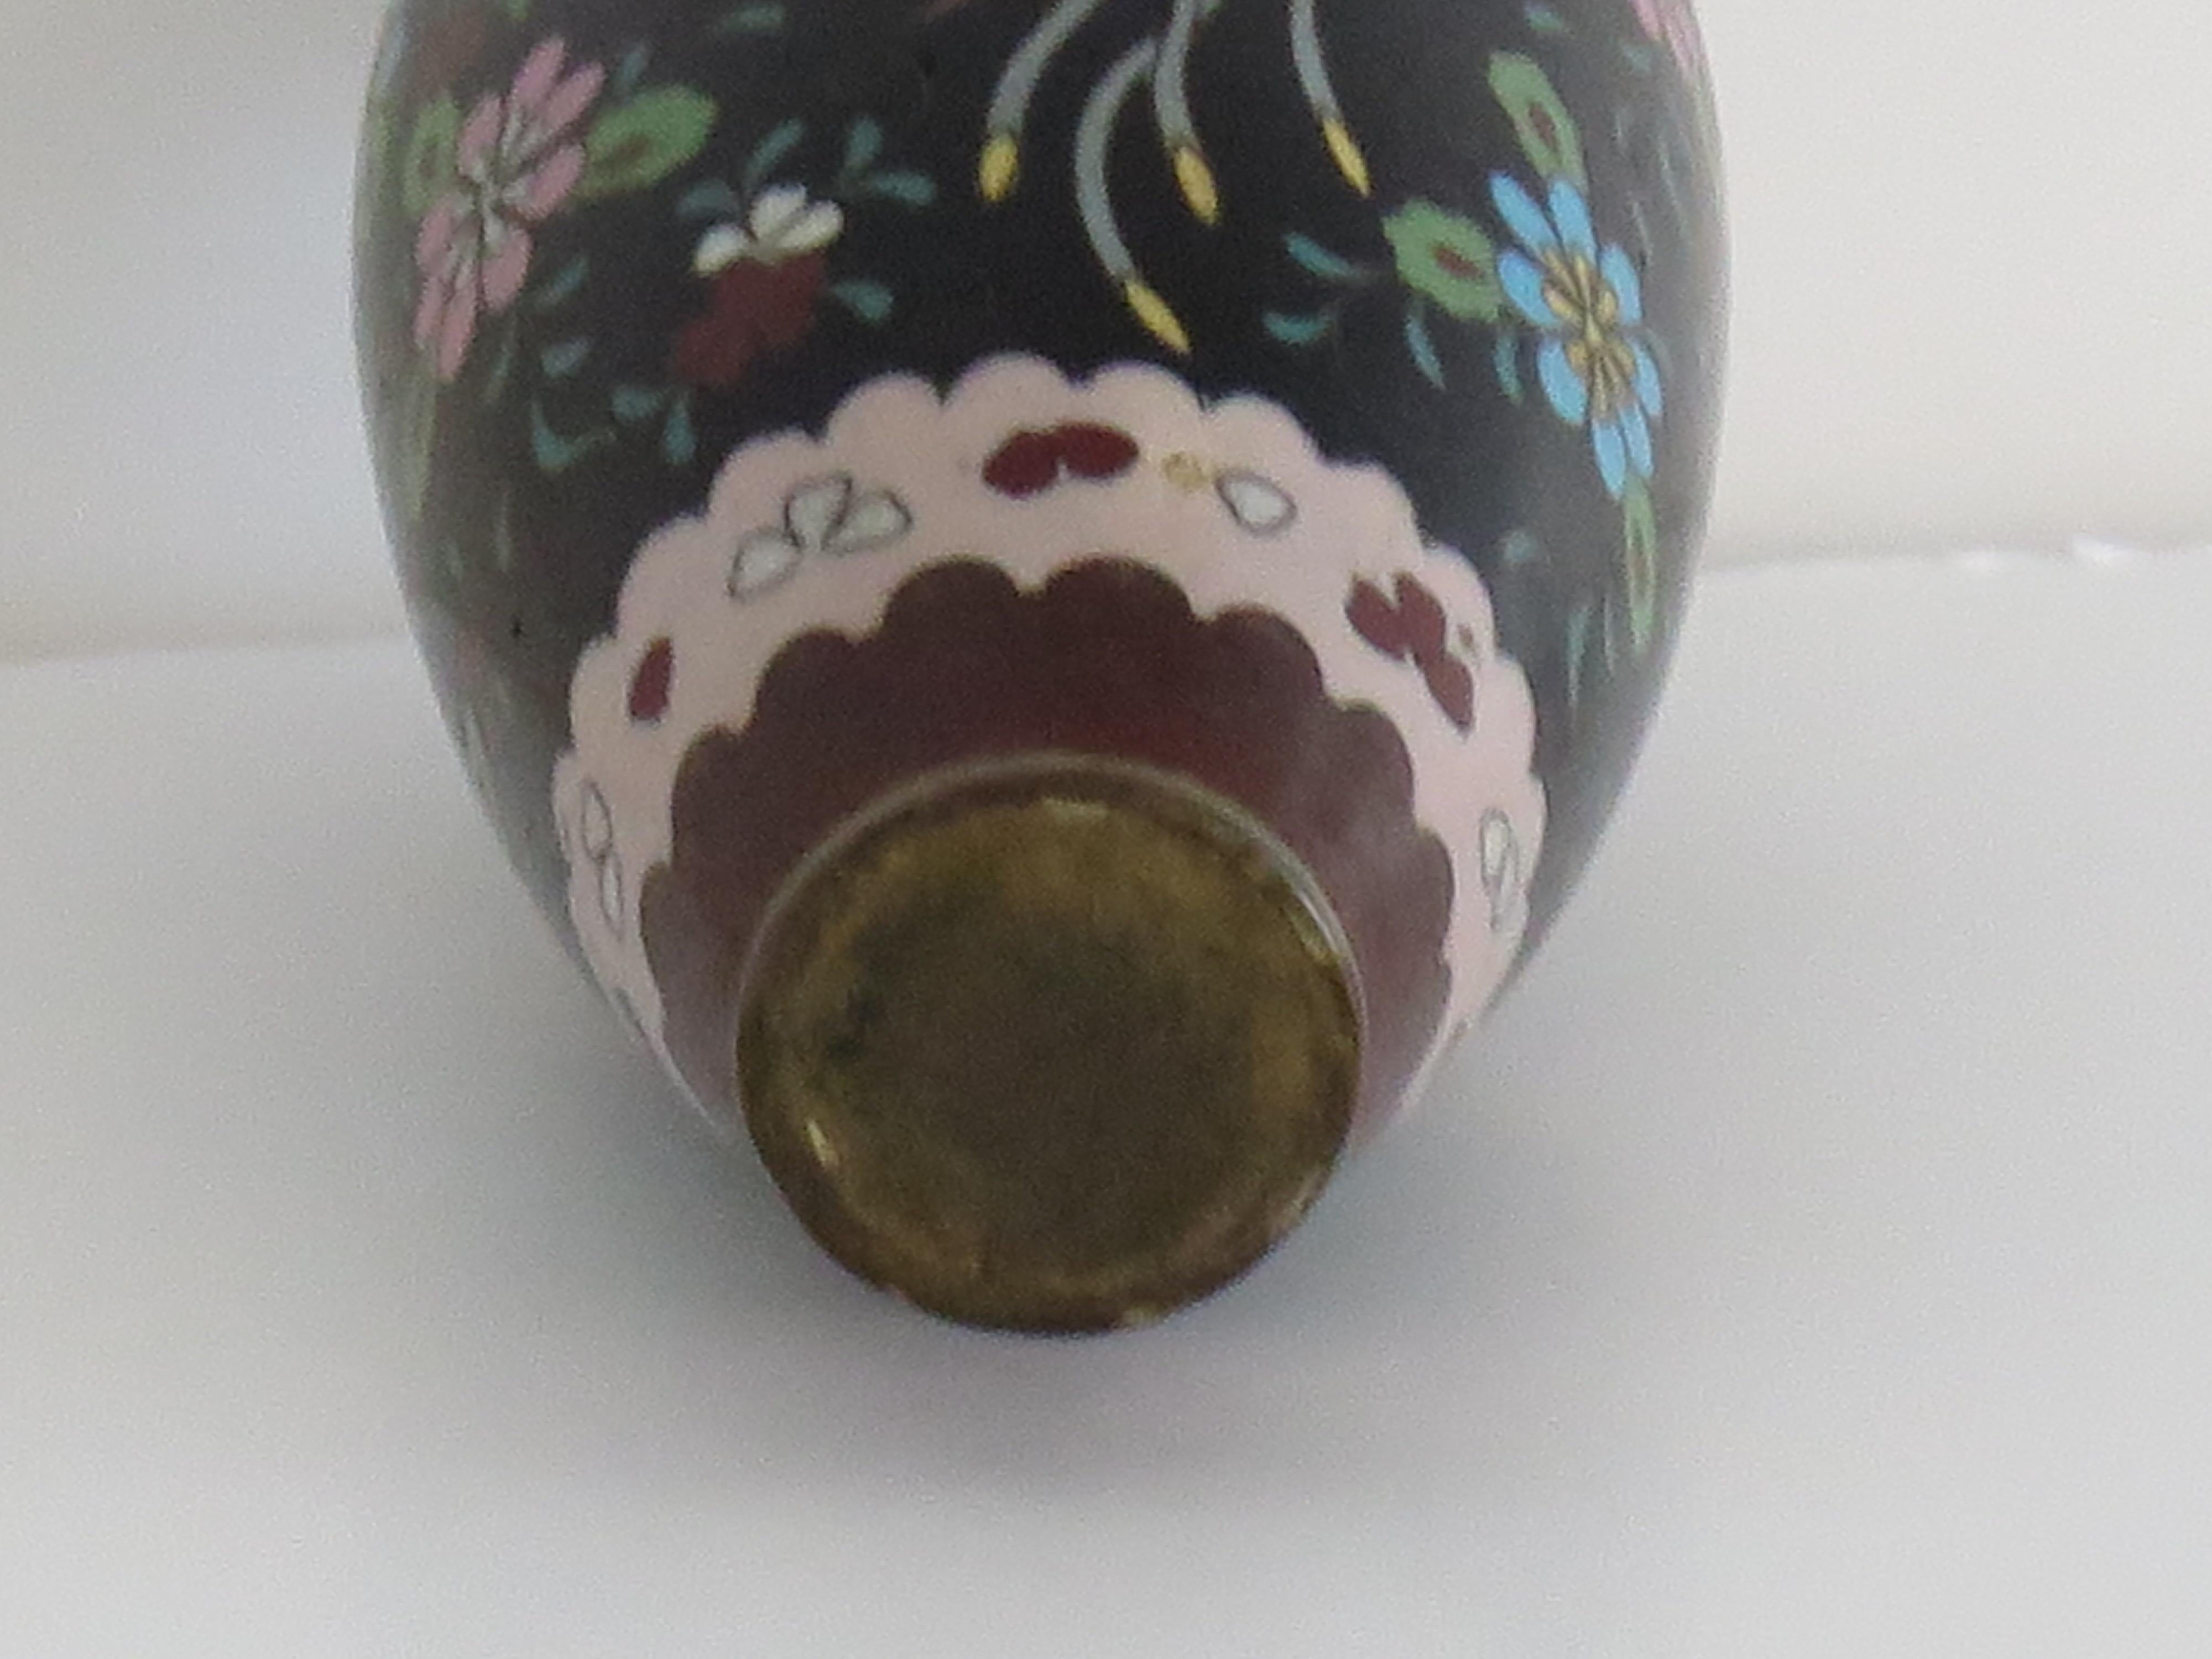 Chinese Cloisonné Vase on Bronze with Phoenixes,  19th Century Qing period  For Sale 6